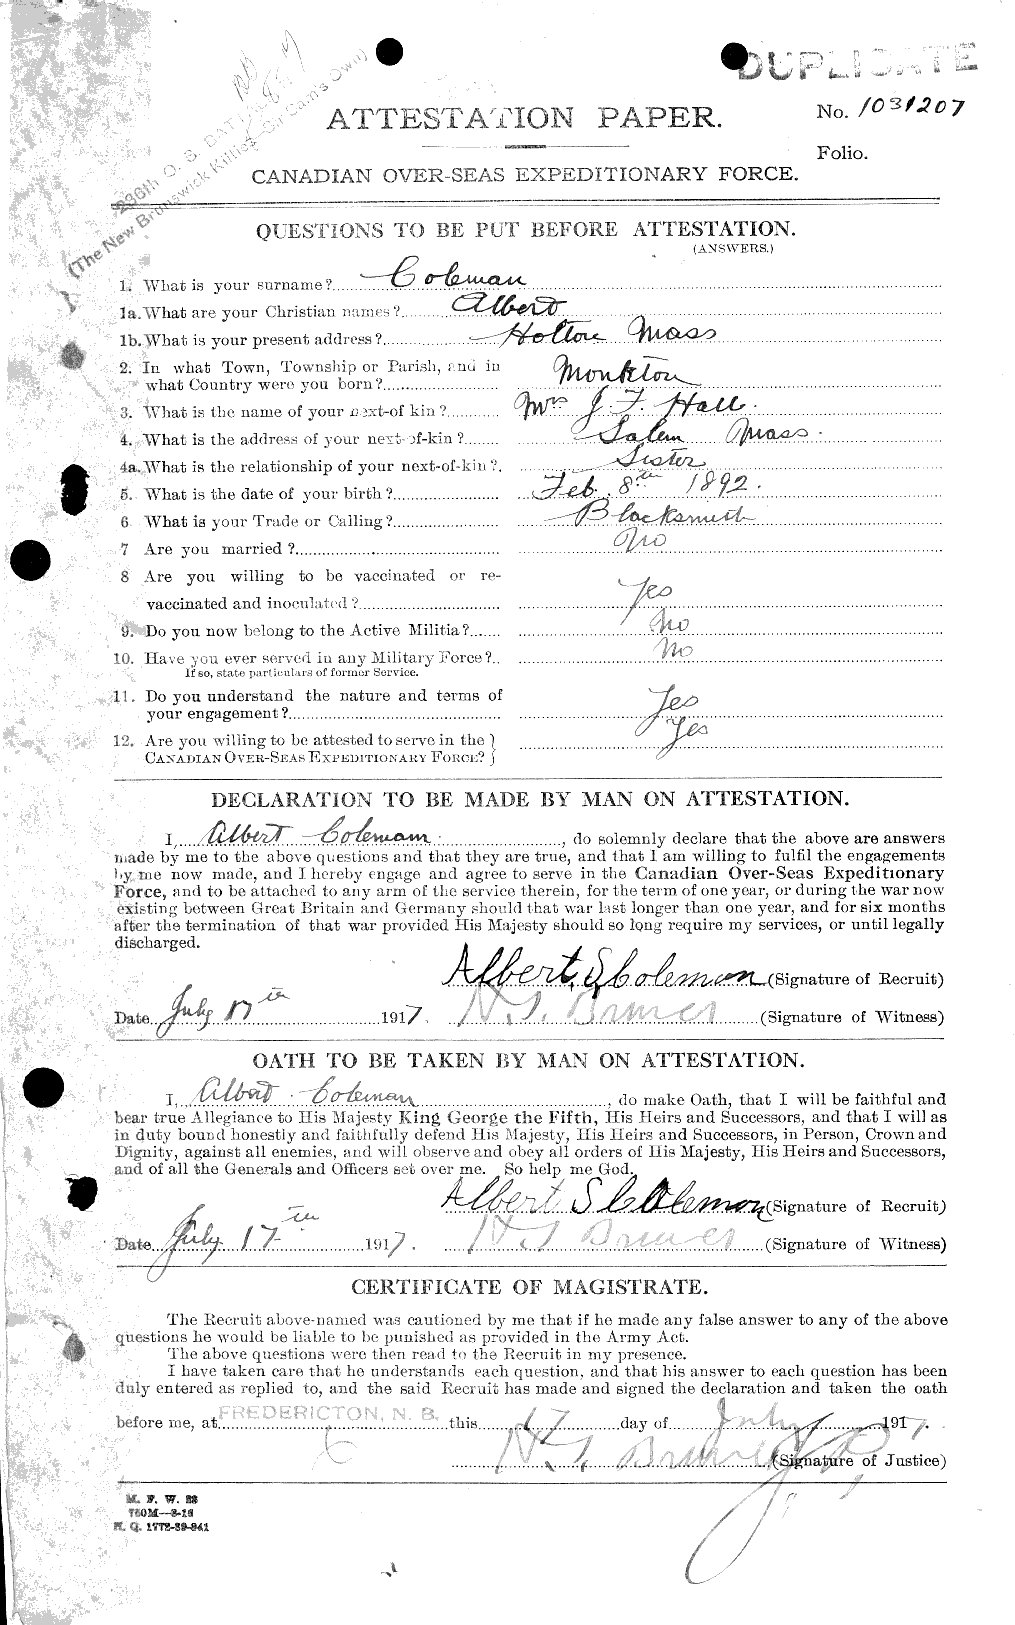 Personnel Records of the First World War - CEF 028051a